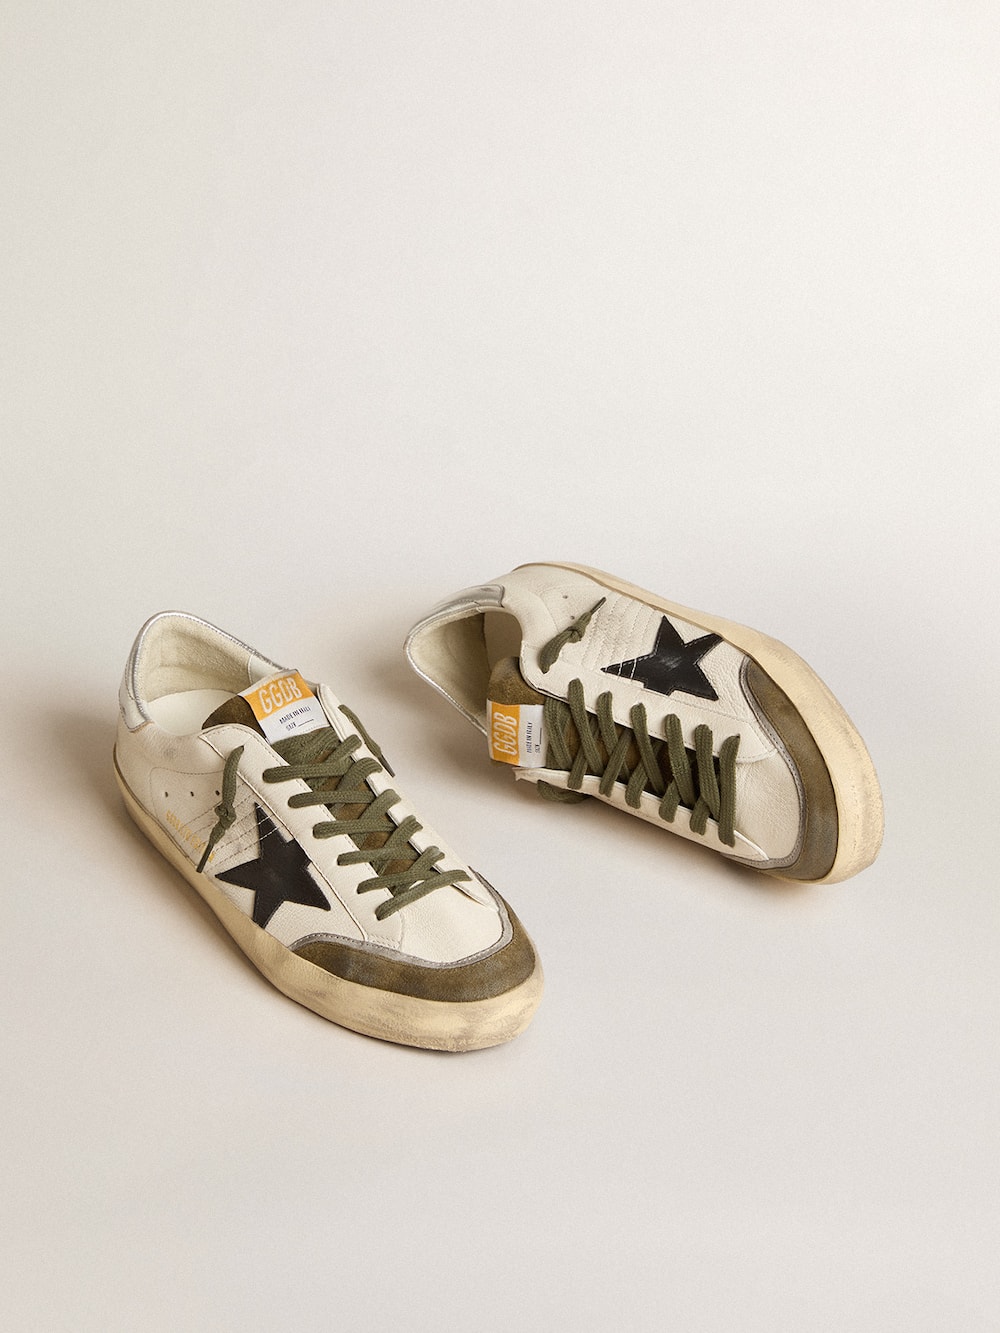 Golden Goose - Super-Star LTD in nappa leather with black leather star and silver heel tab in 